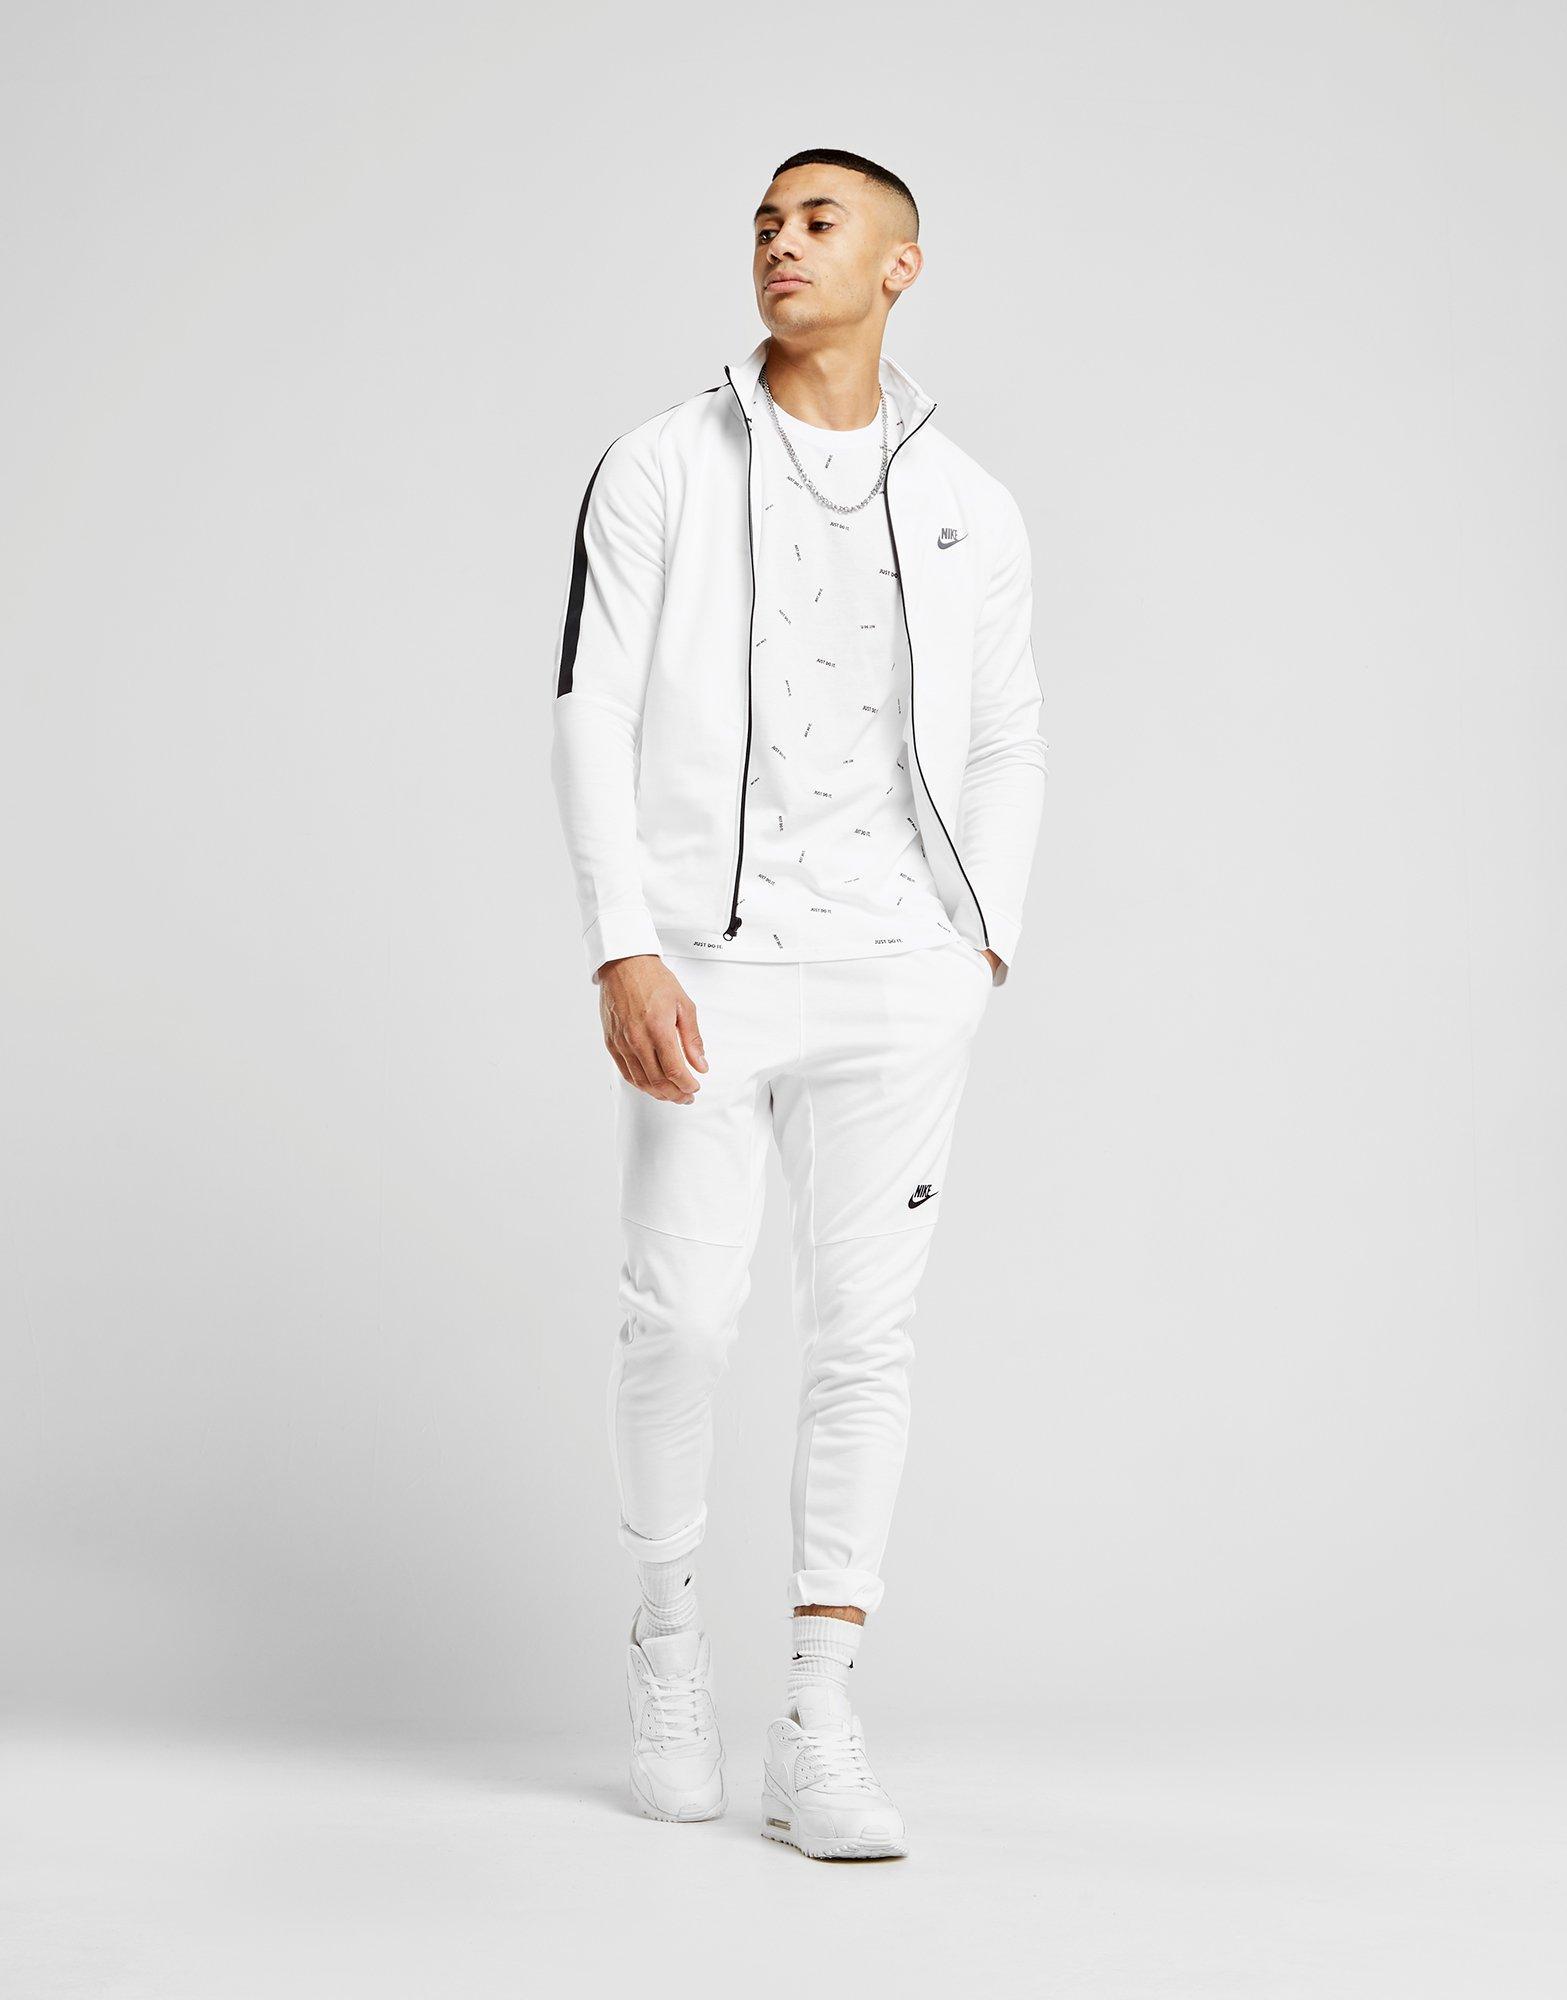 Nike Synthetic Tribute Track Top in White for Men - Lyst